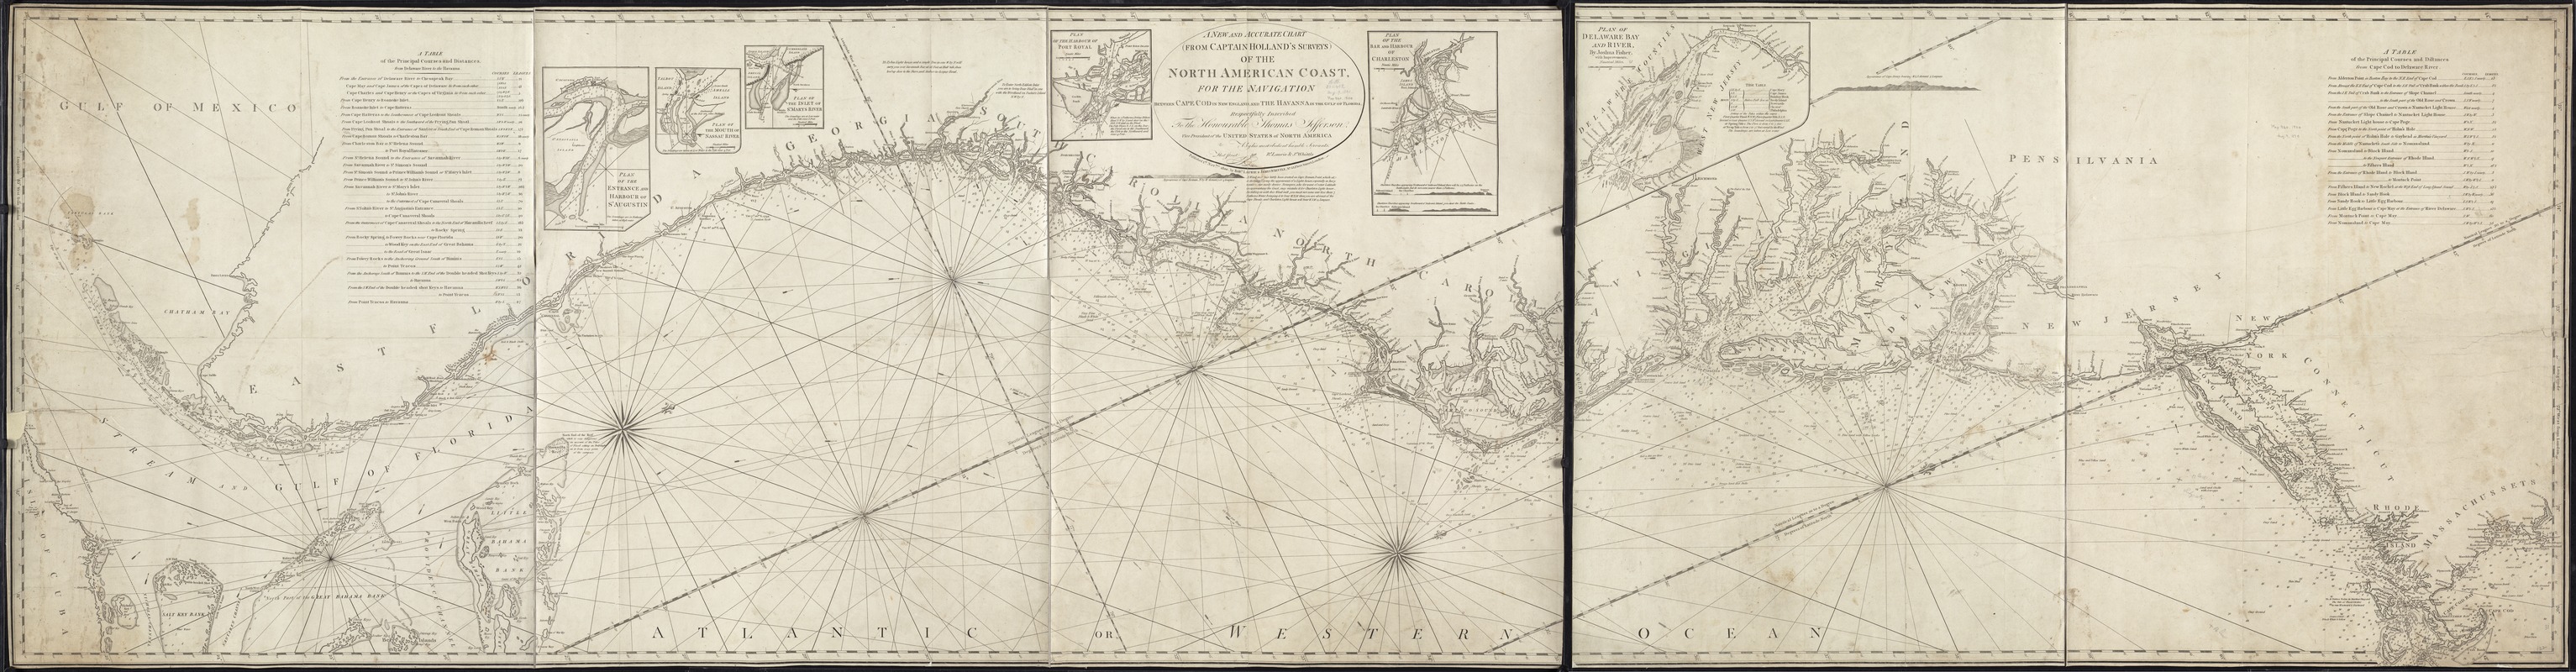 A new and accurate chart (from Captain Holland's surveys) of the North American coast, for the navigation between Cape Cod in New England, and the Havanna in the Gulf of Florida